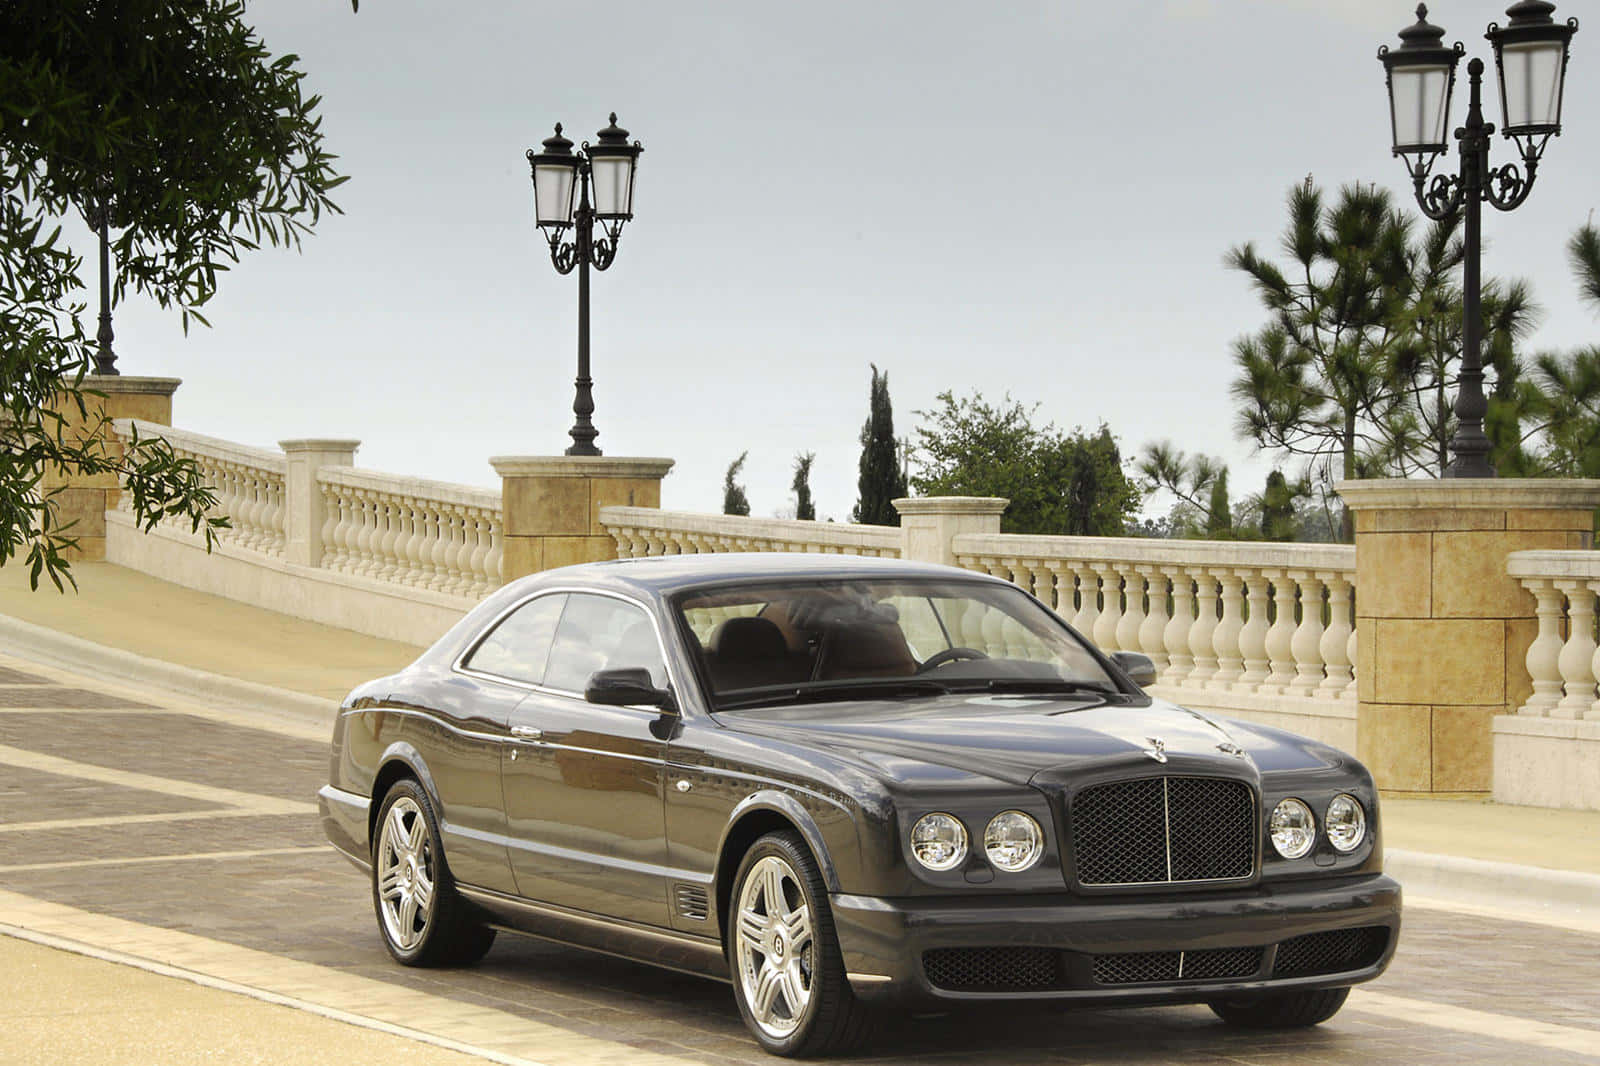 Caption: A classic Bentley Brooklands luxury car showcasing its elegance and style. Wallpaper